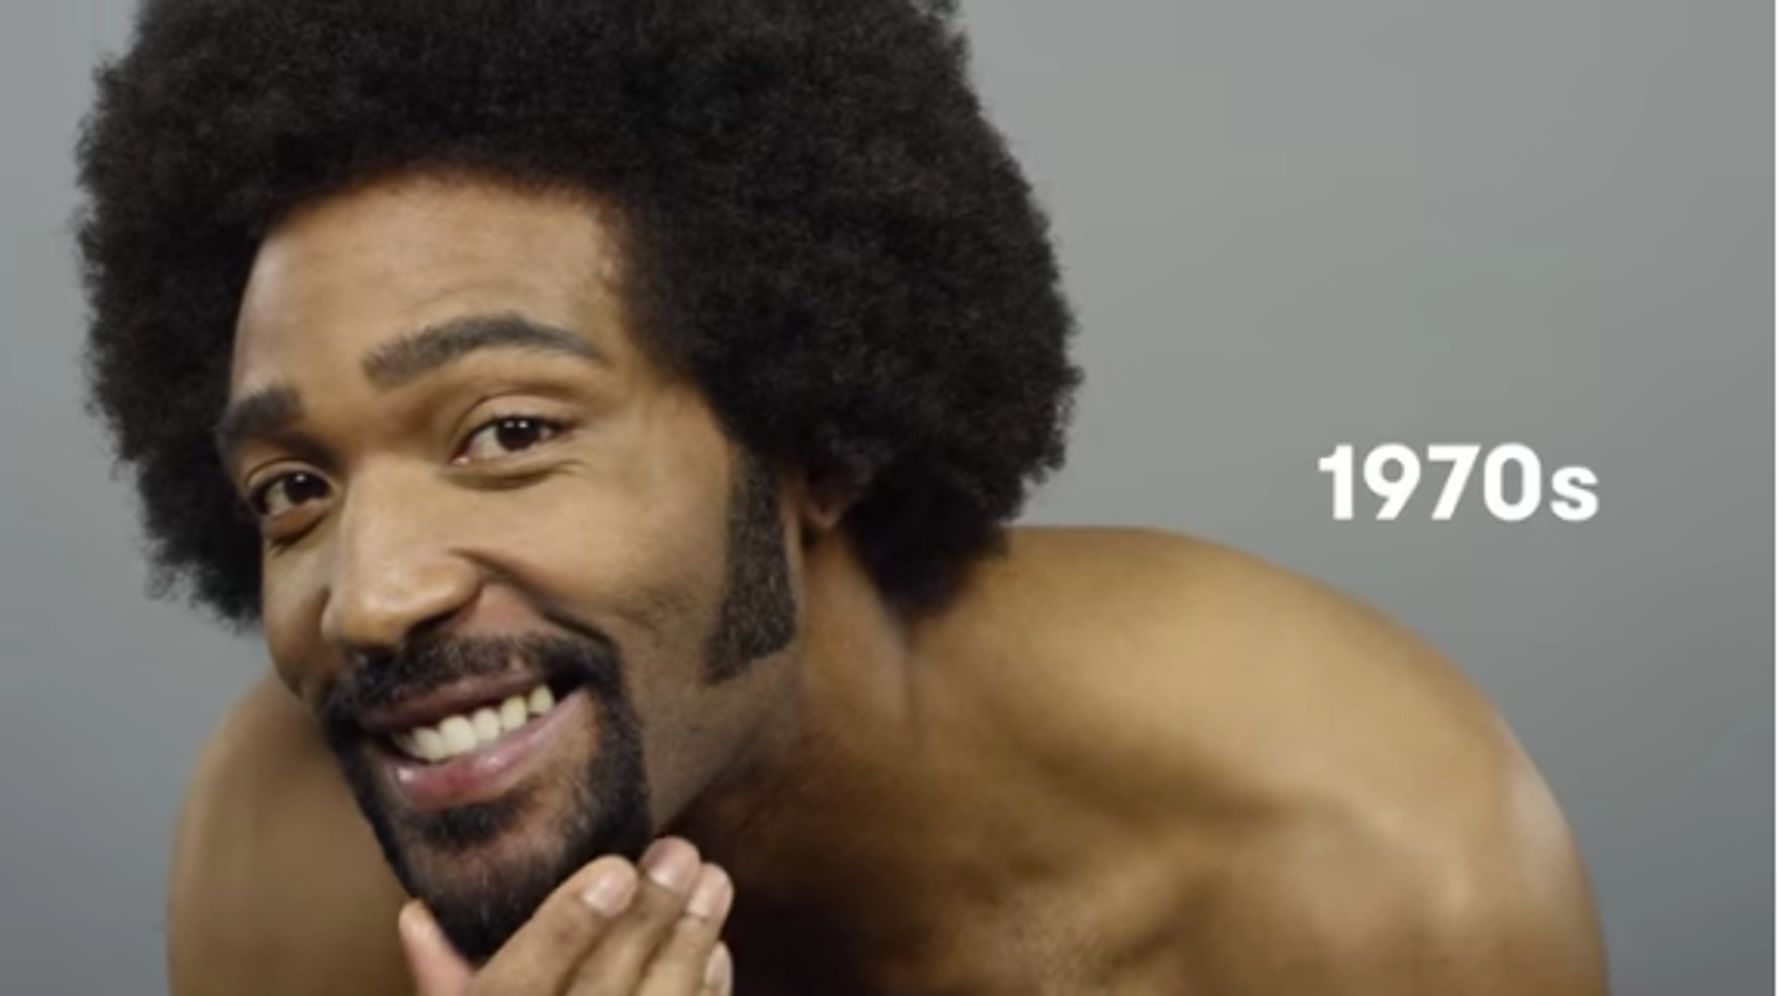 This Video Shows The Amazing Evolution Of Black Men S Hair Over A